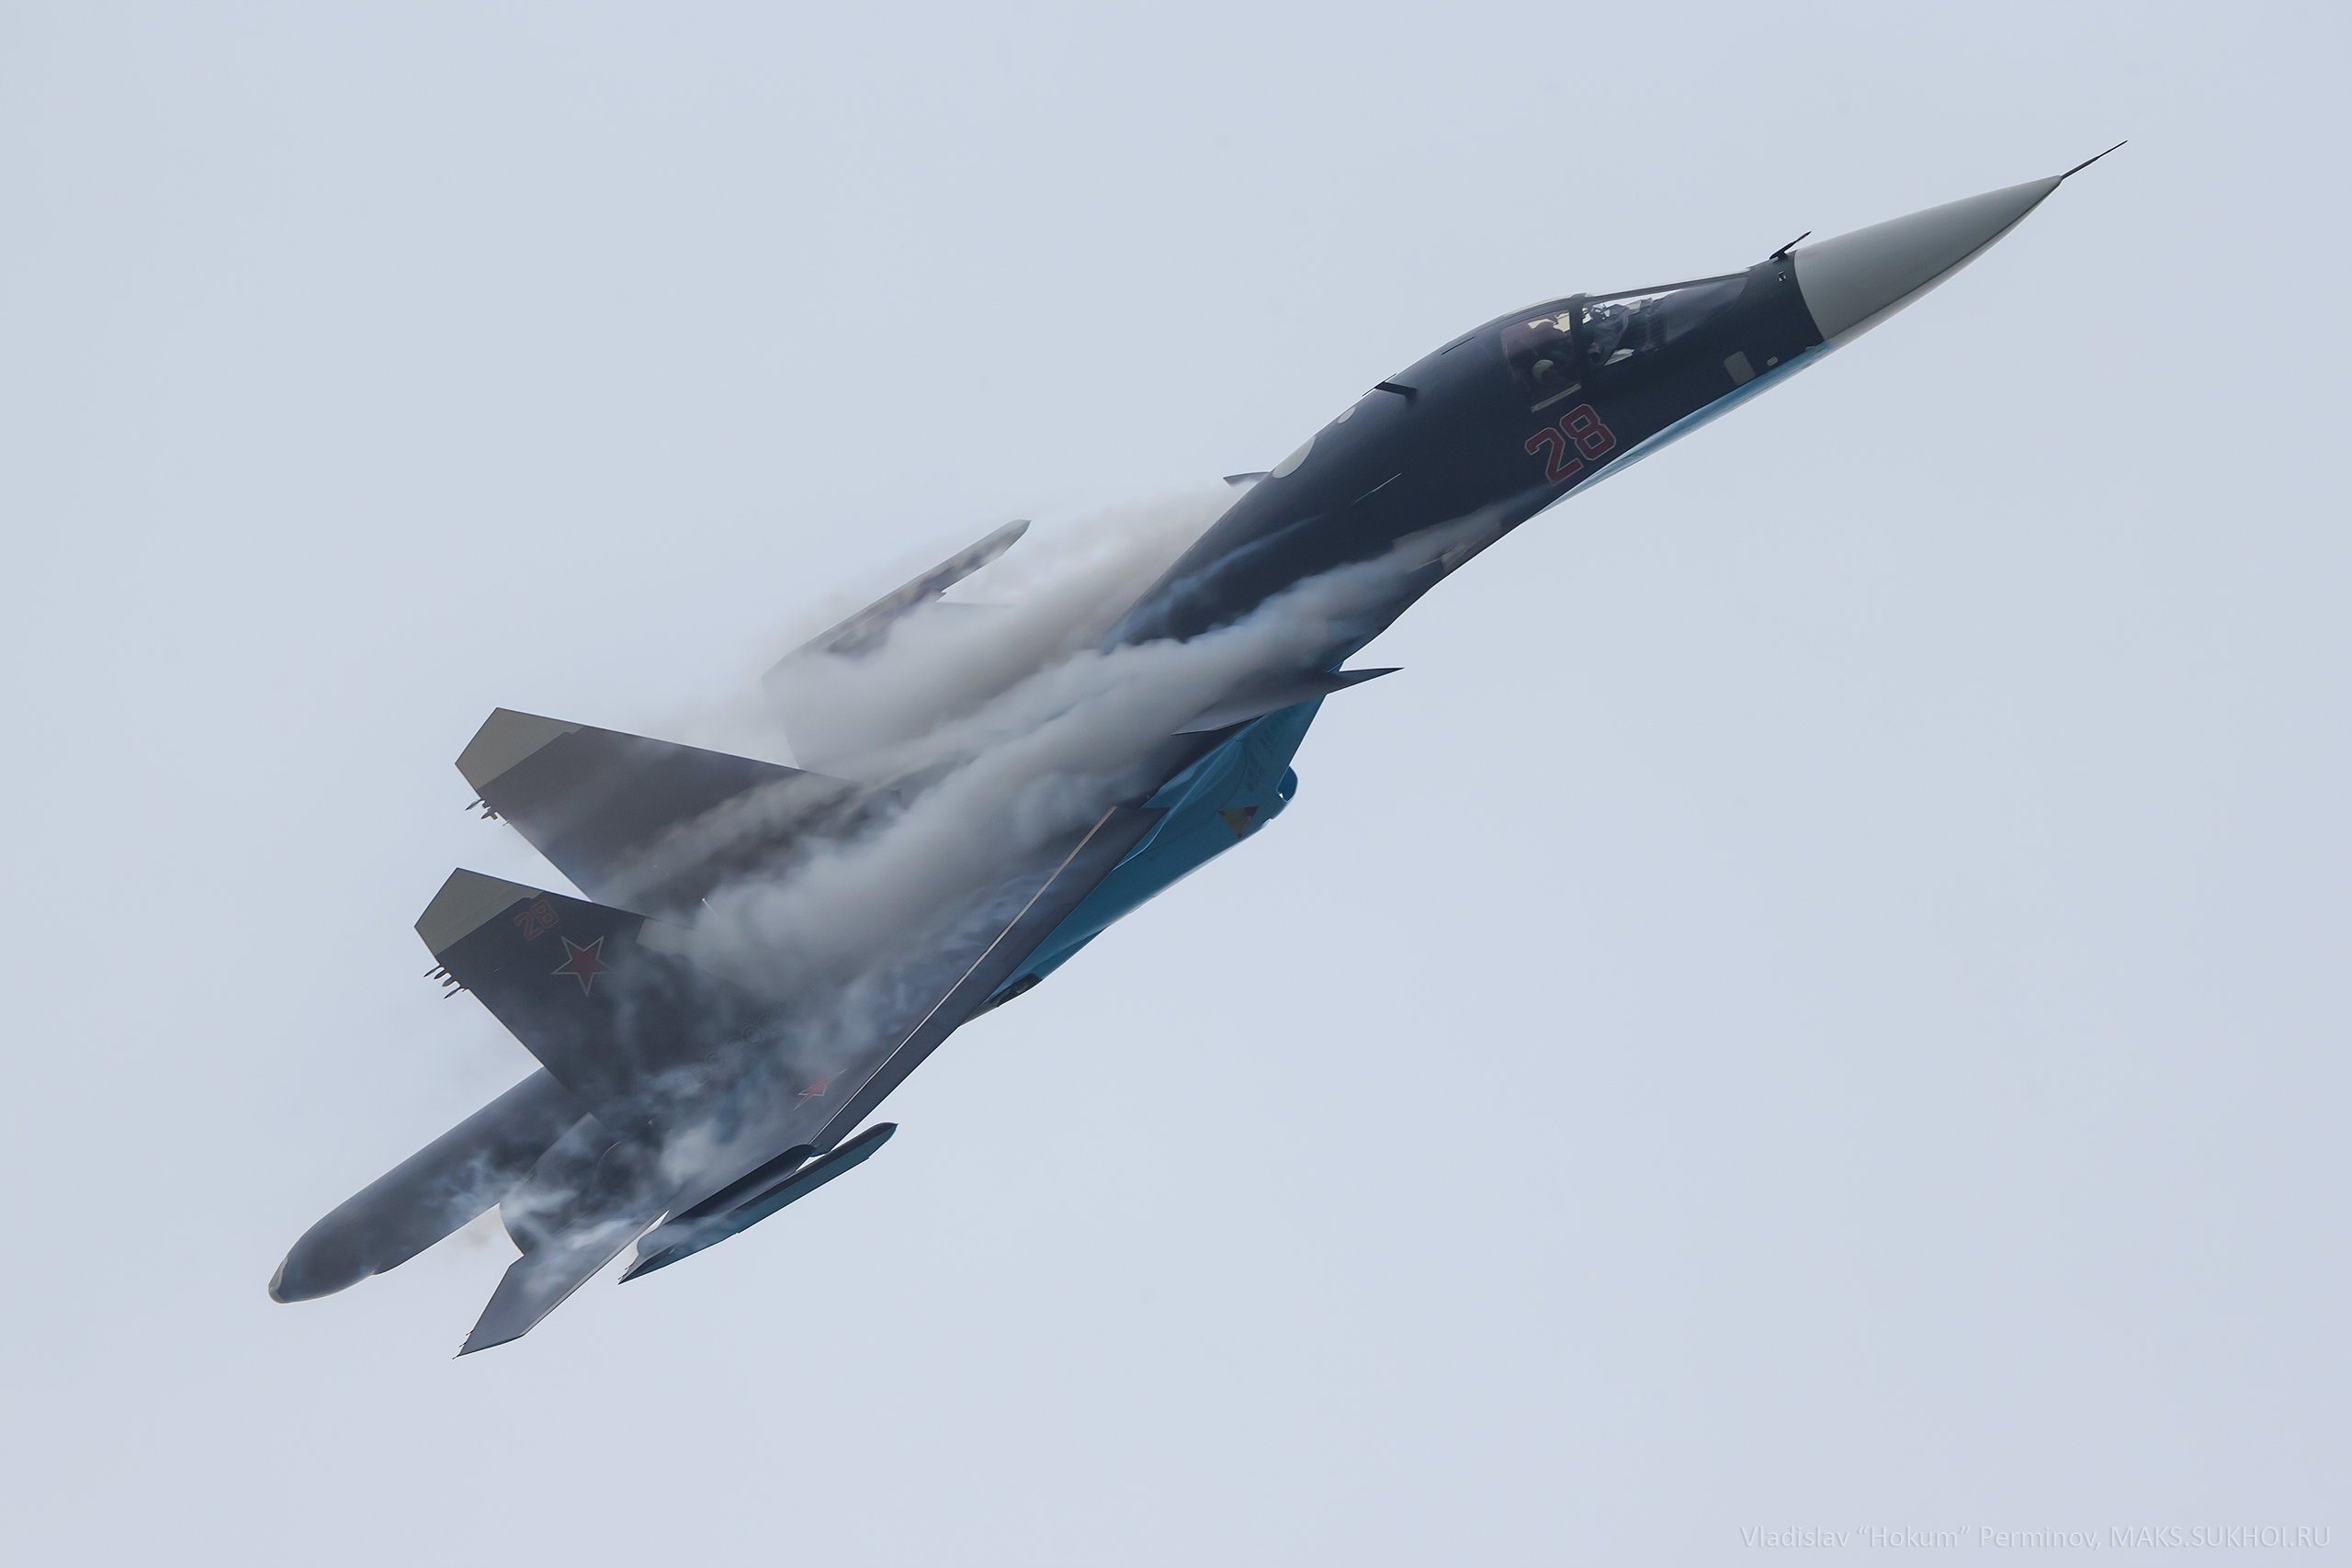 General 2560x1707 airplane military aircraft Sukhoi Bomber Sukhoi Su-34 military vehicle military aircraft Russian Air Force condensation